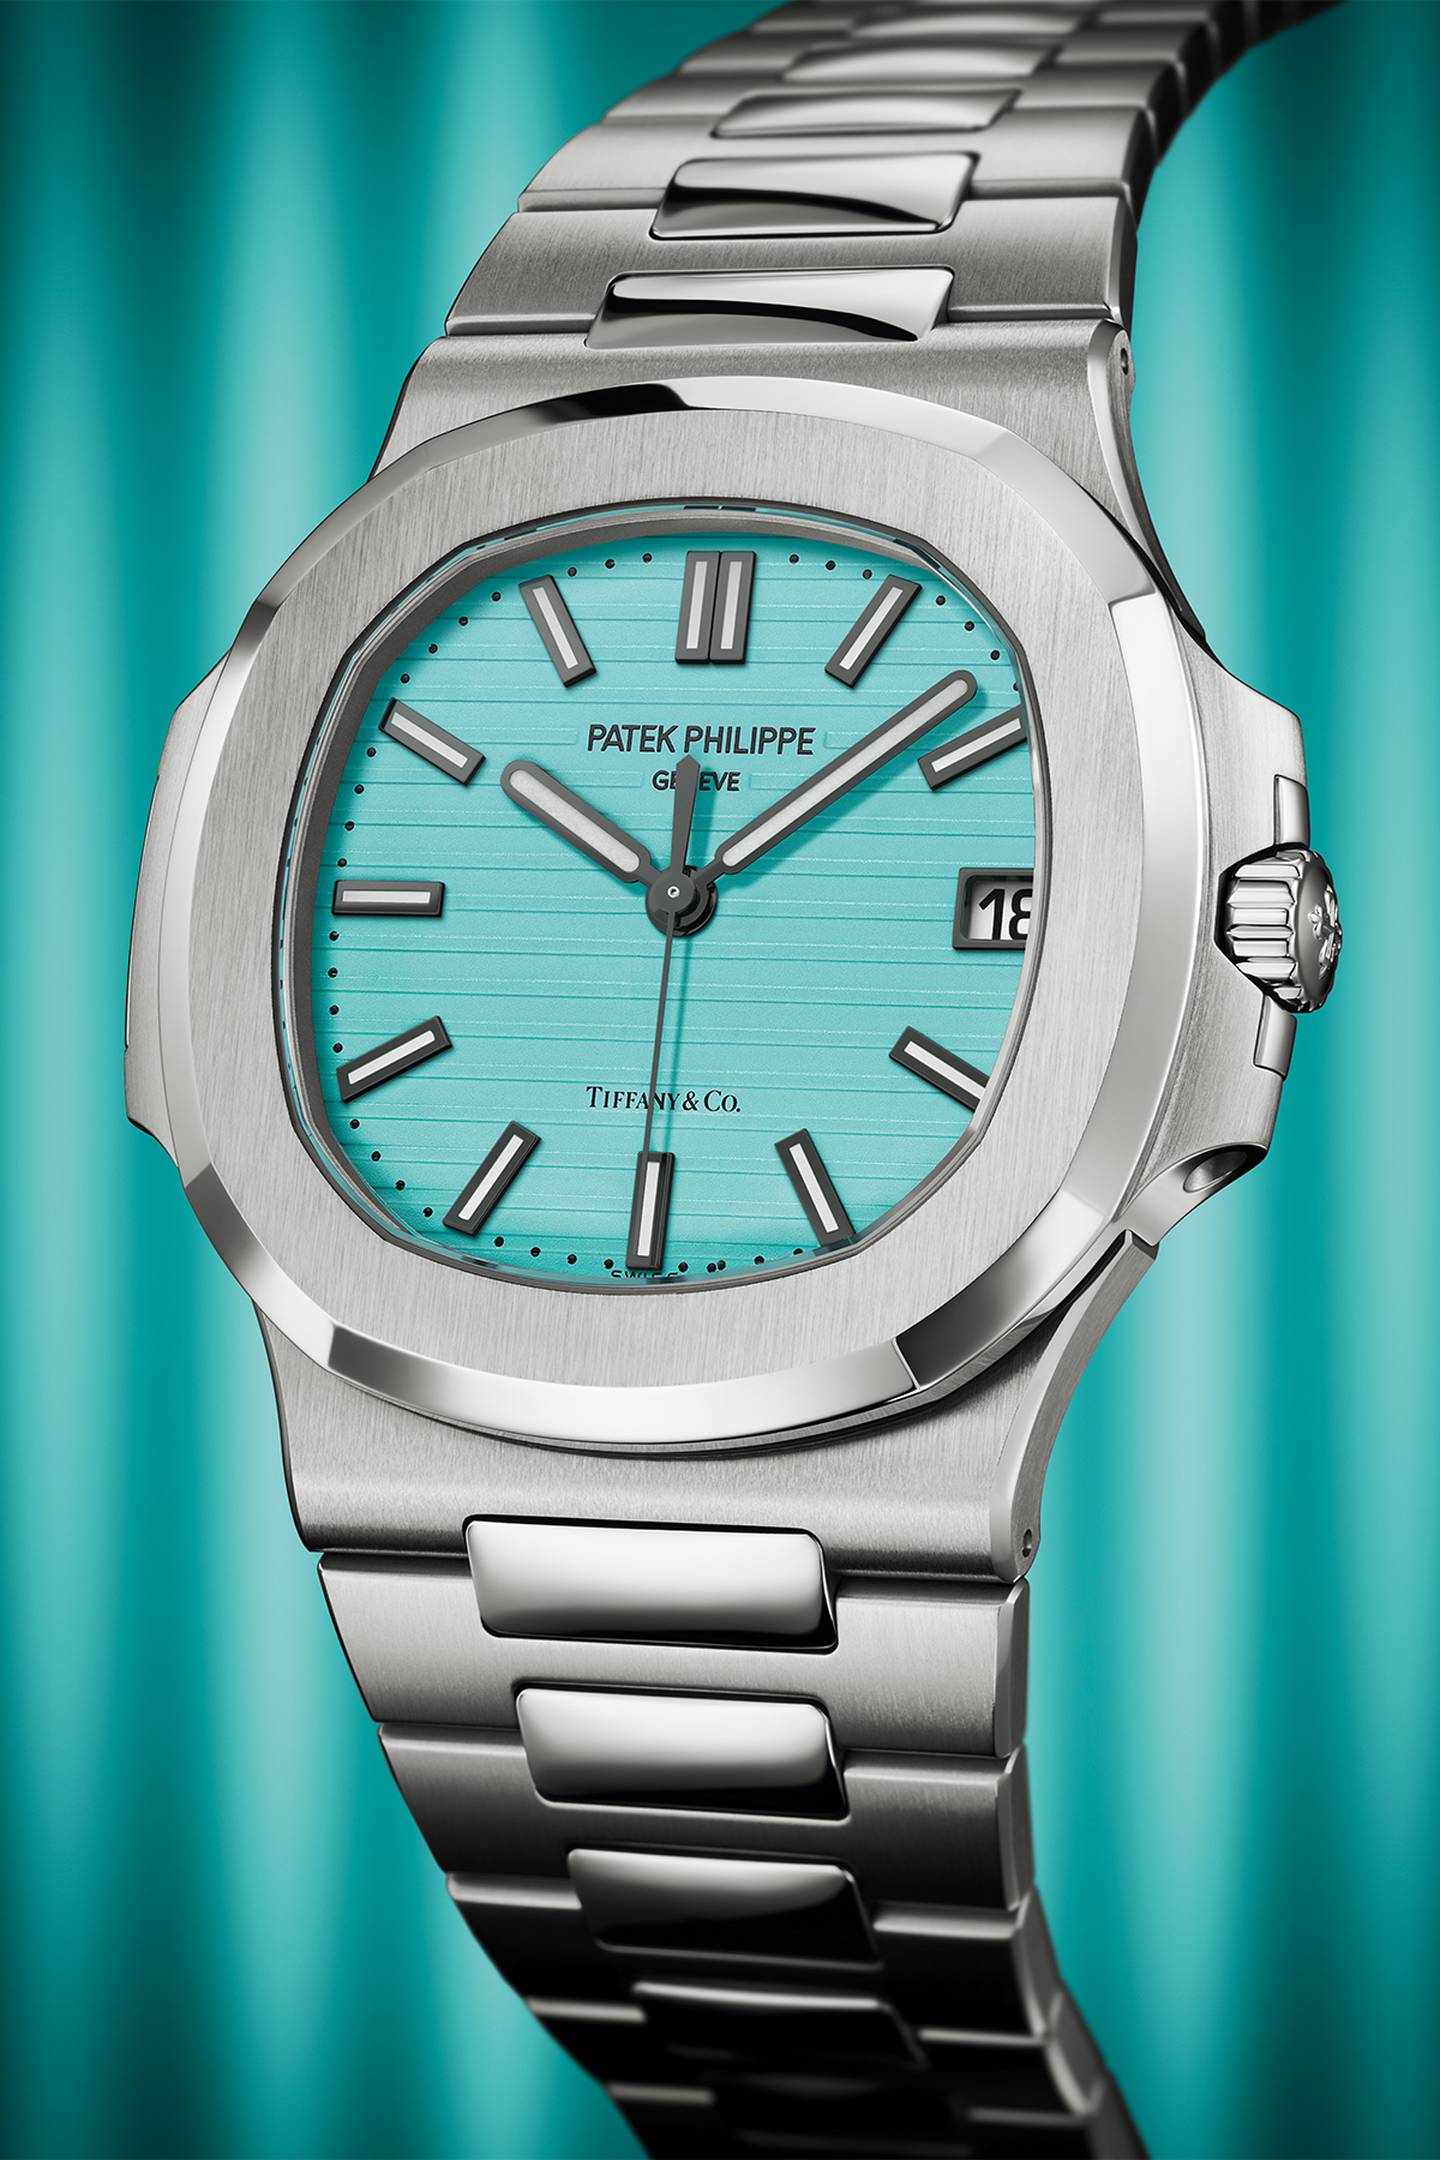 Patek Philippe and Tiffany & Co. announce the last-ever Nautilus 5711.